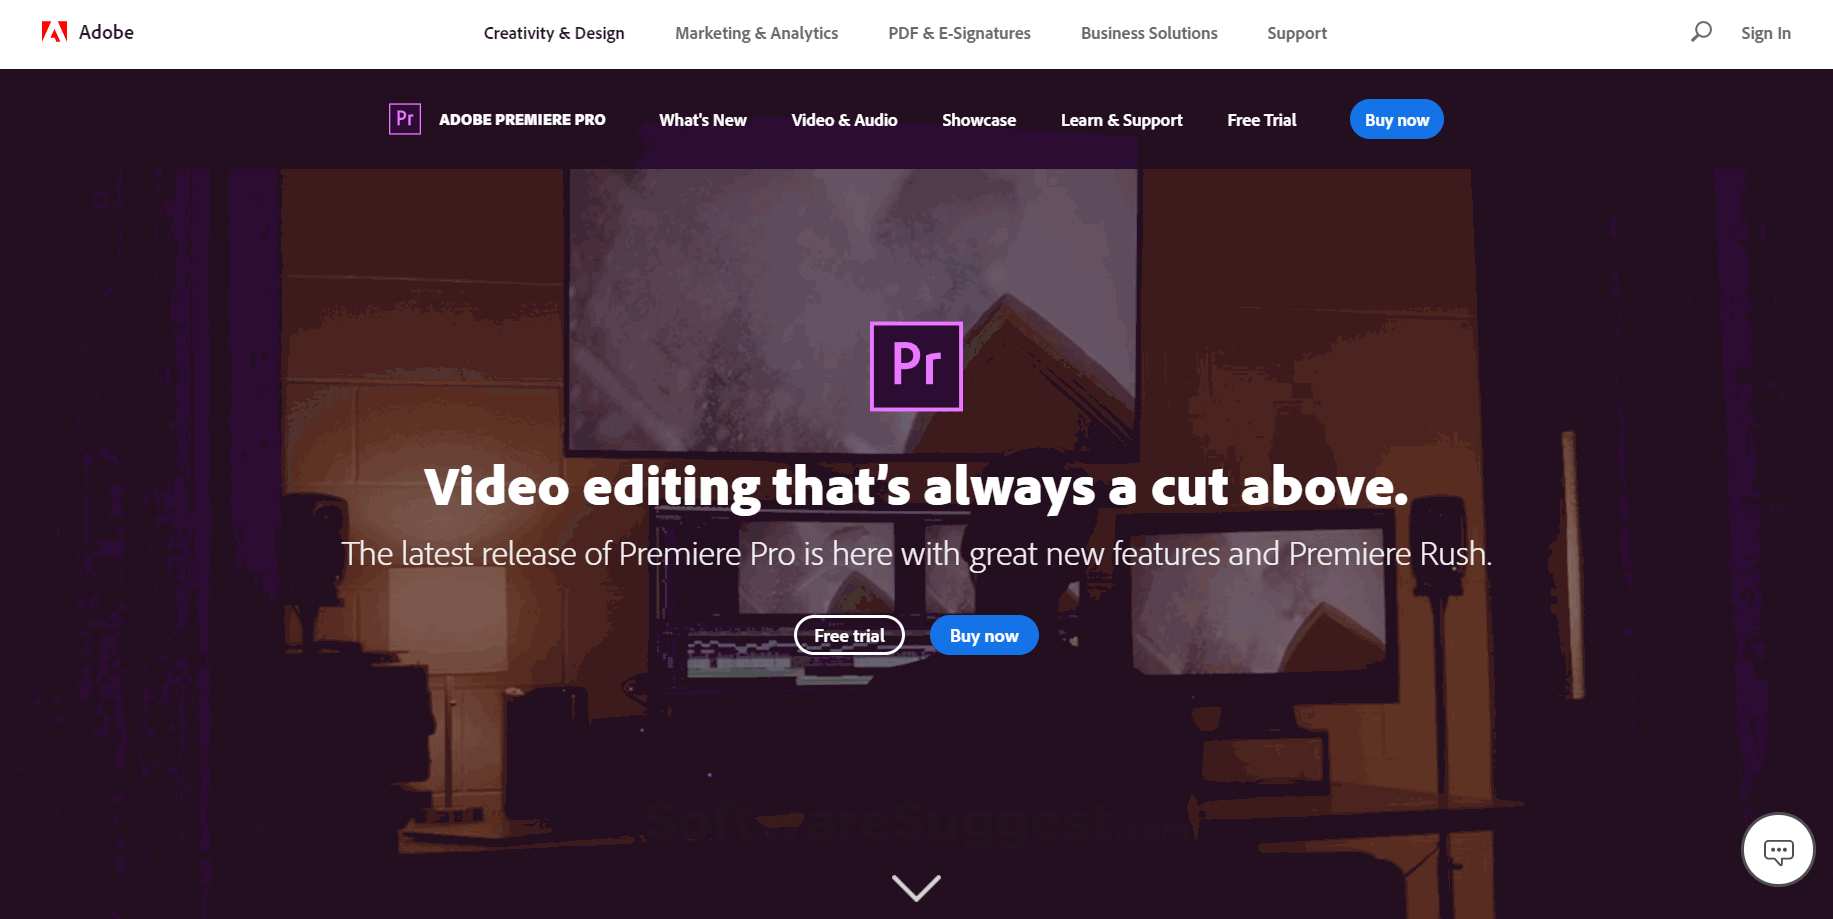 how long is adobe premiere pro free trial